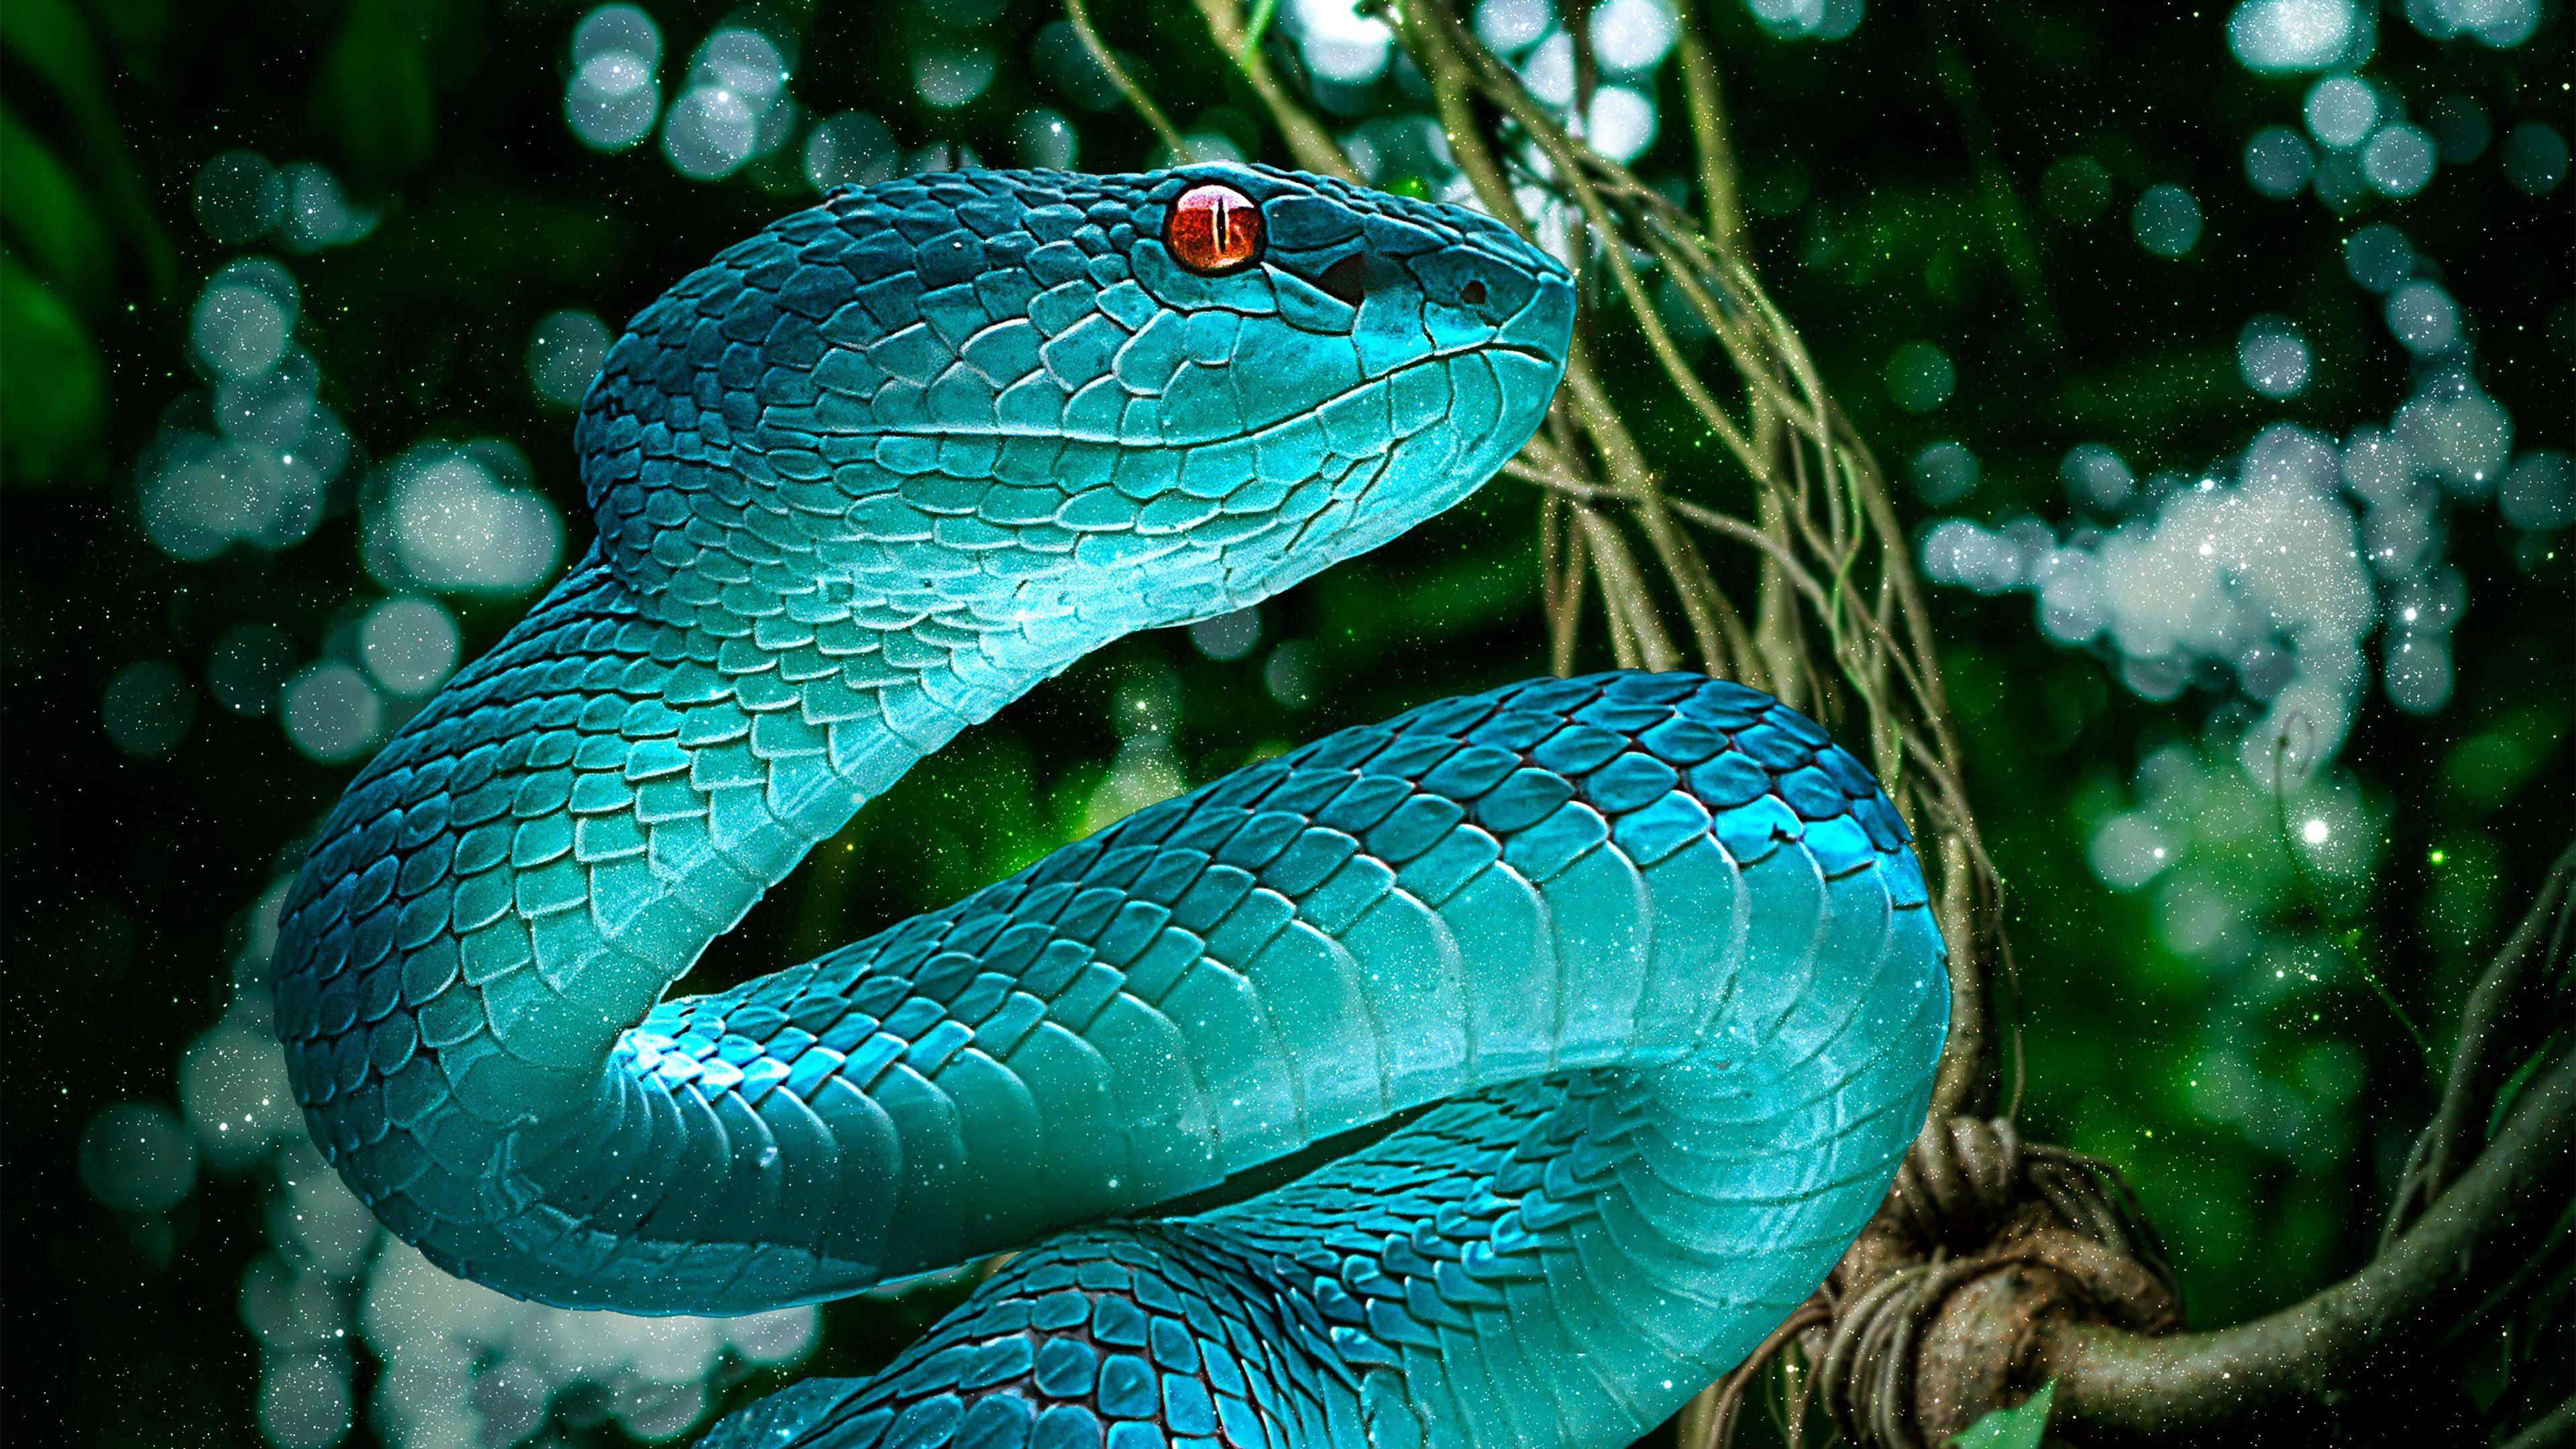 Viper Snakes Wallpapers